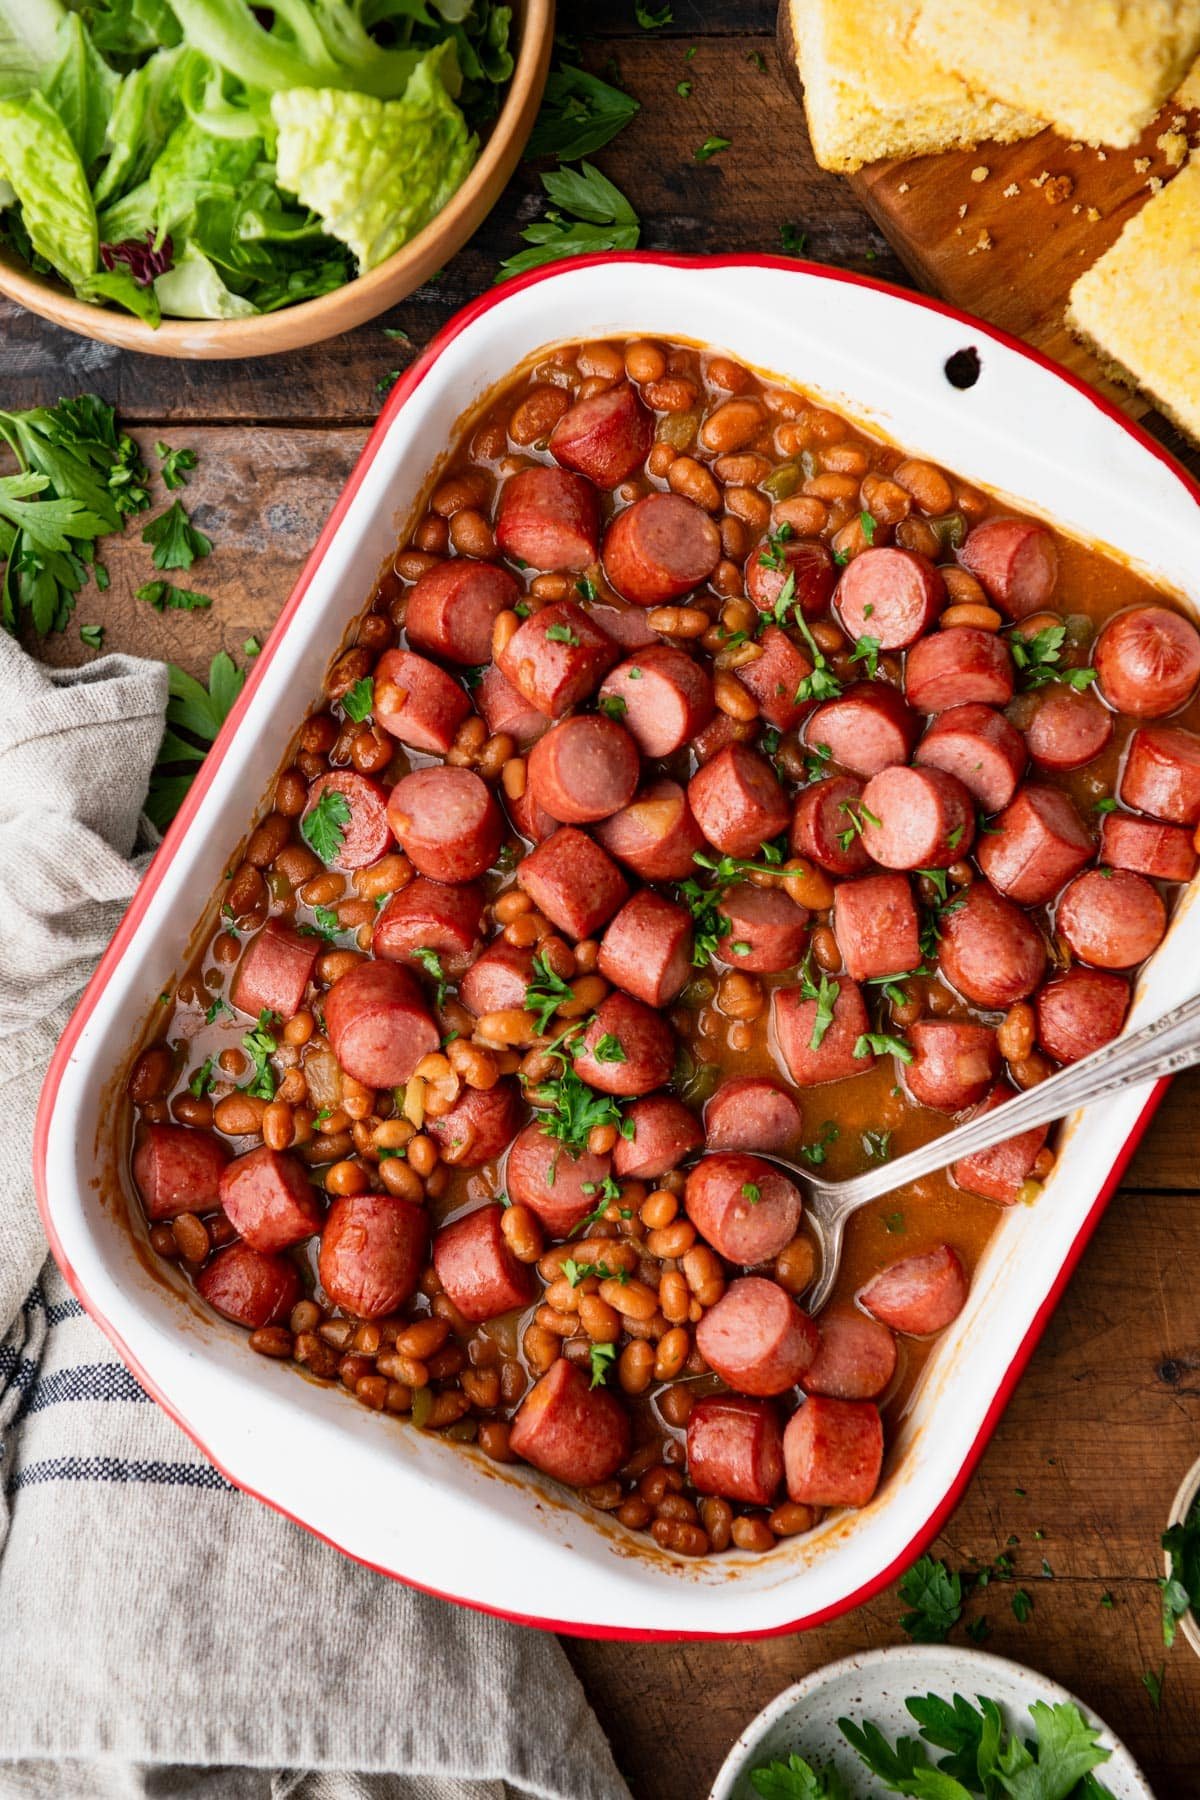 Pan of frank and beans on a wooden table with a serving spoon.